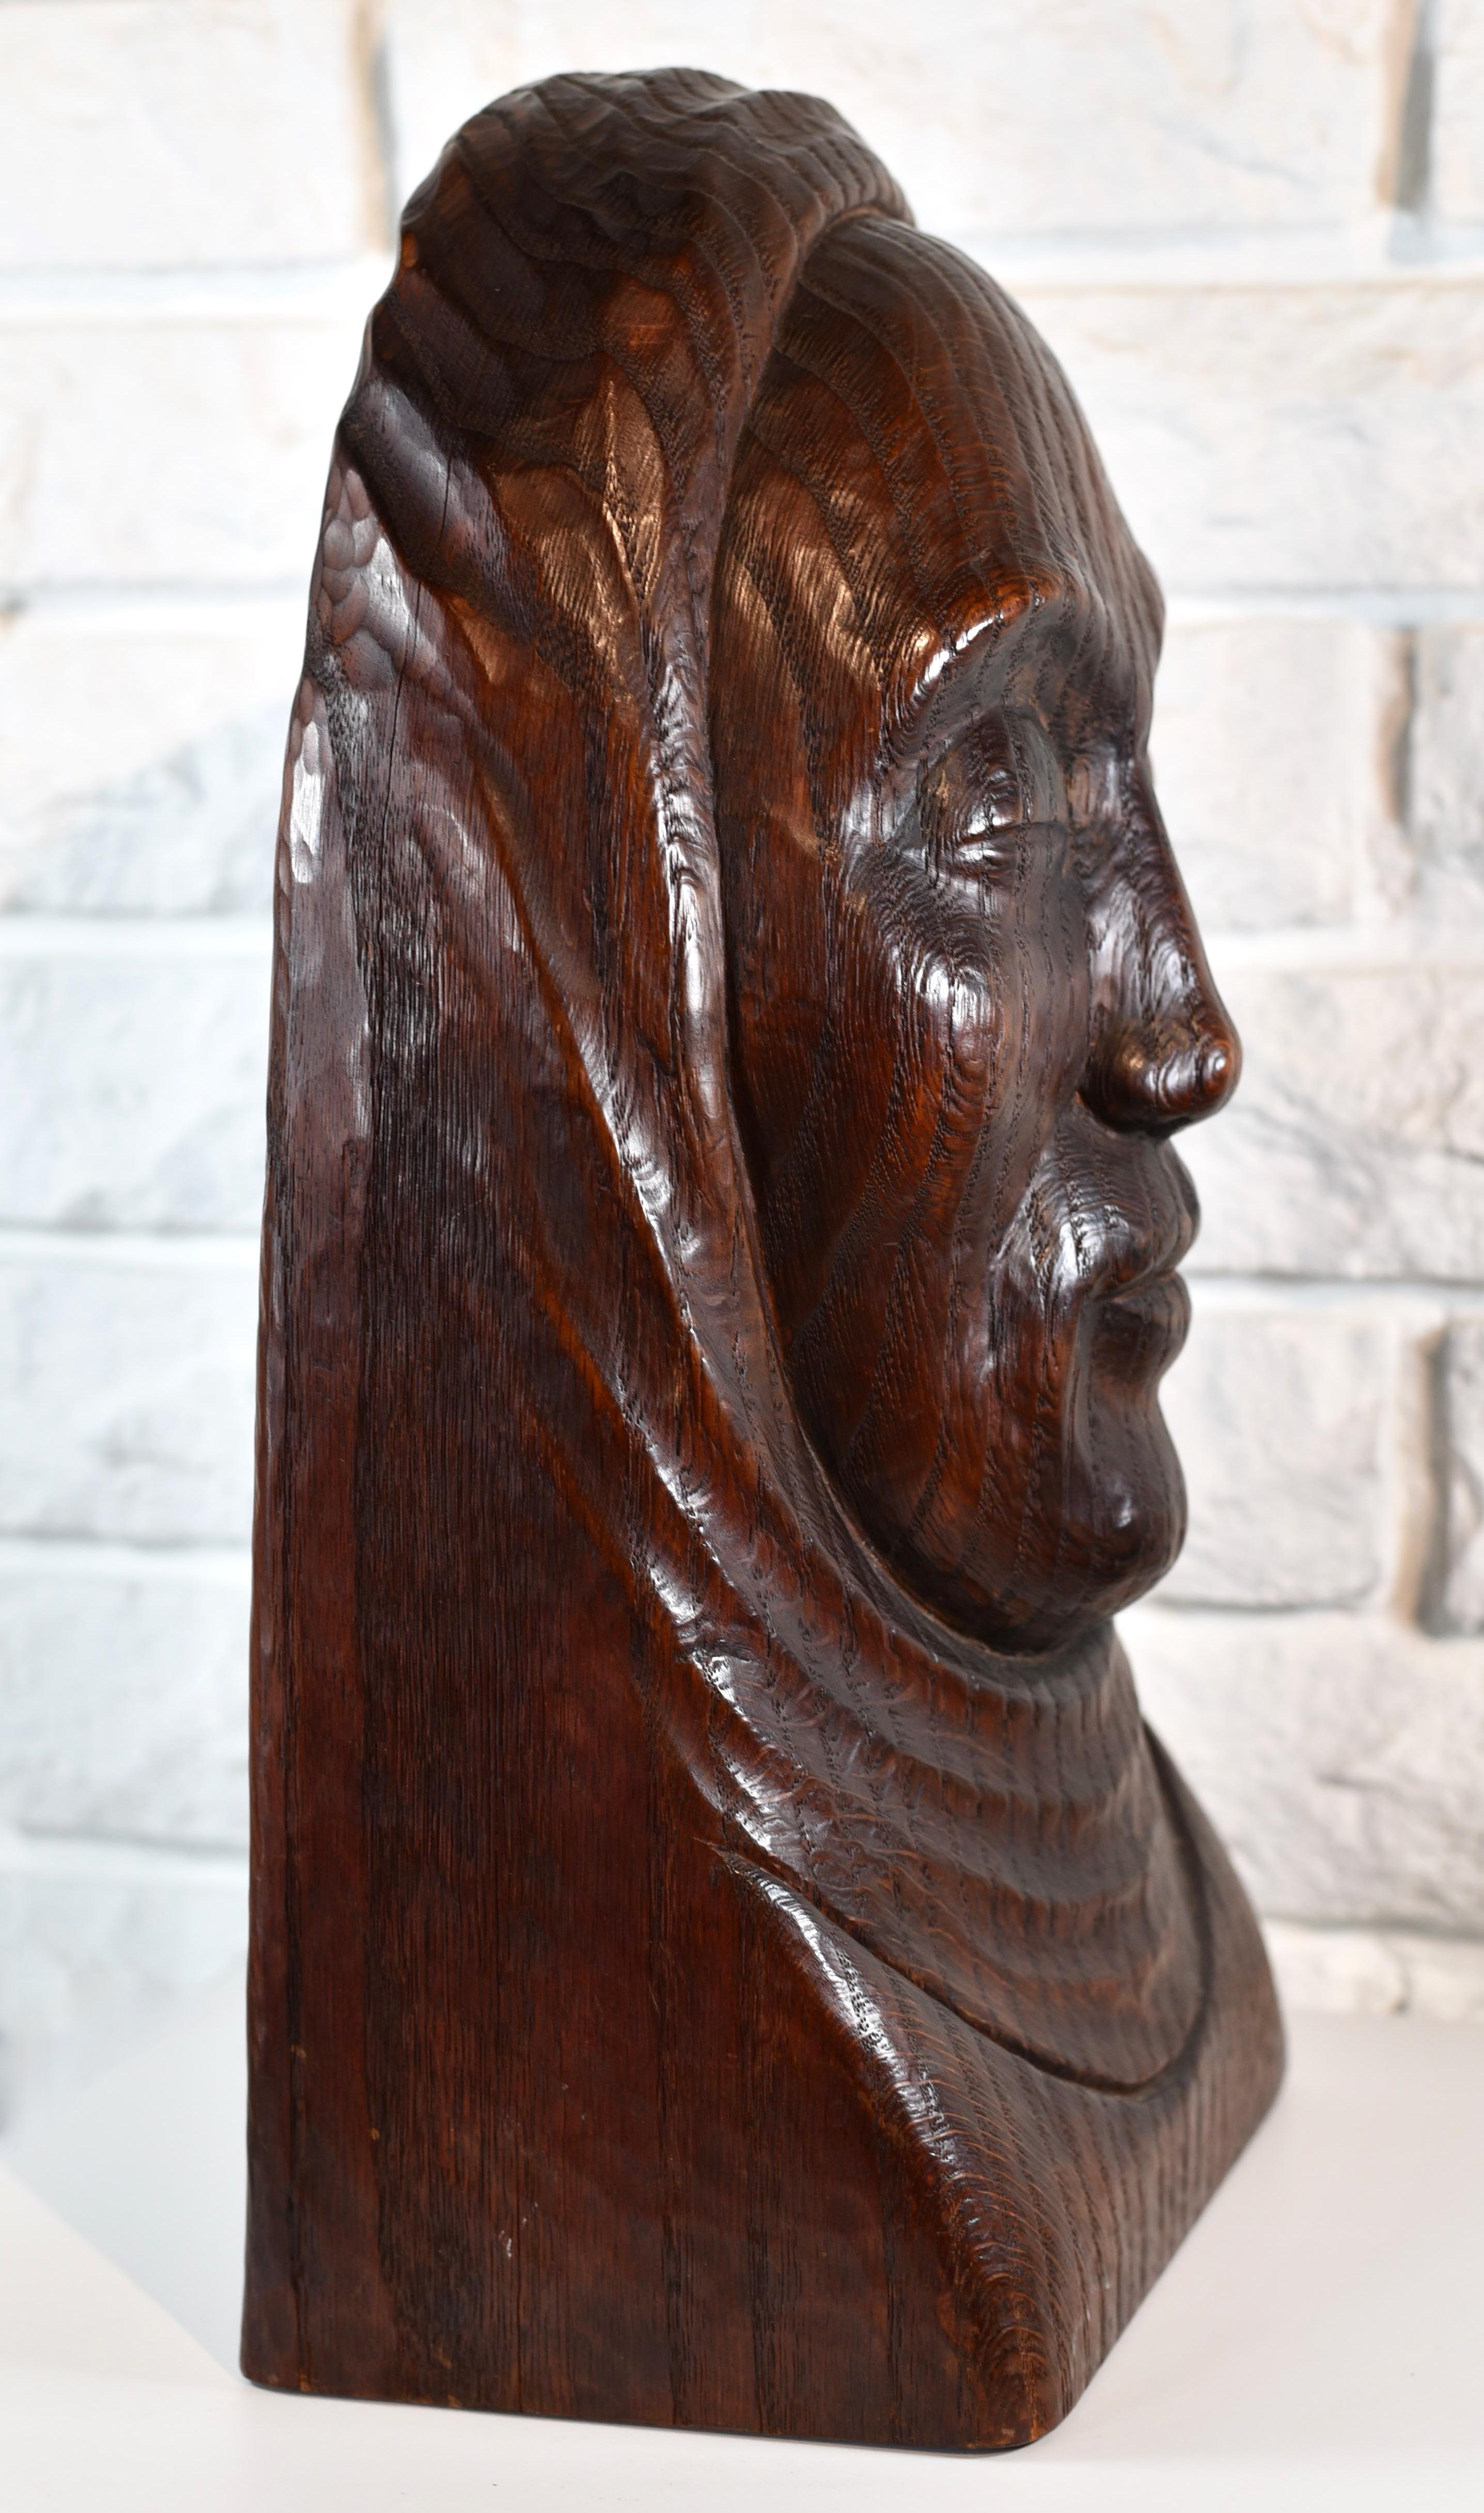 SIgned to the rear and dated 1942.

In 1933 Rood started wood carving in Athens, Ohio and it wasn't long before he had his first one-person exhibit at Argent Galleries, in New York in 1937. His style began with a large bulky folk style and themes of